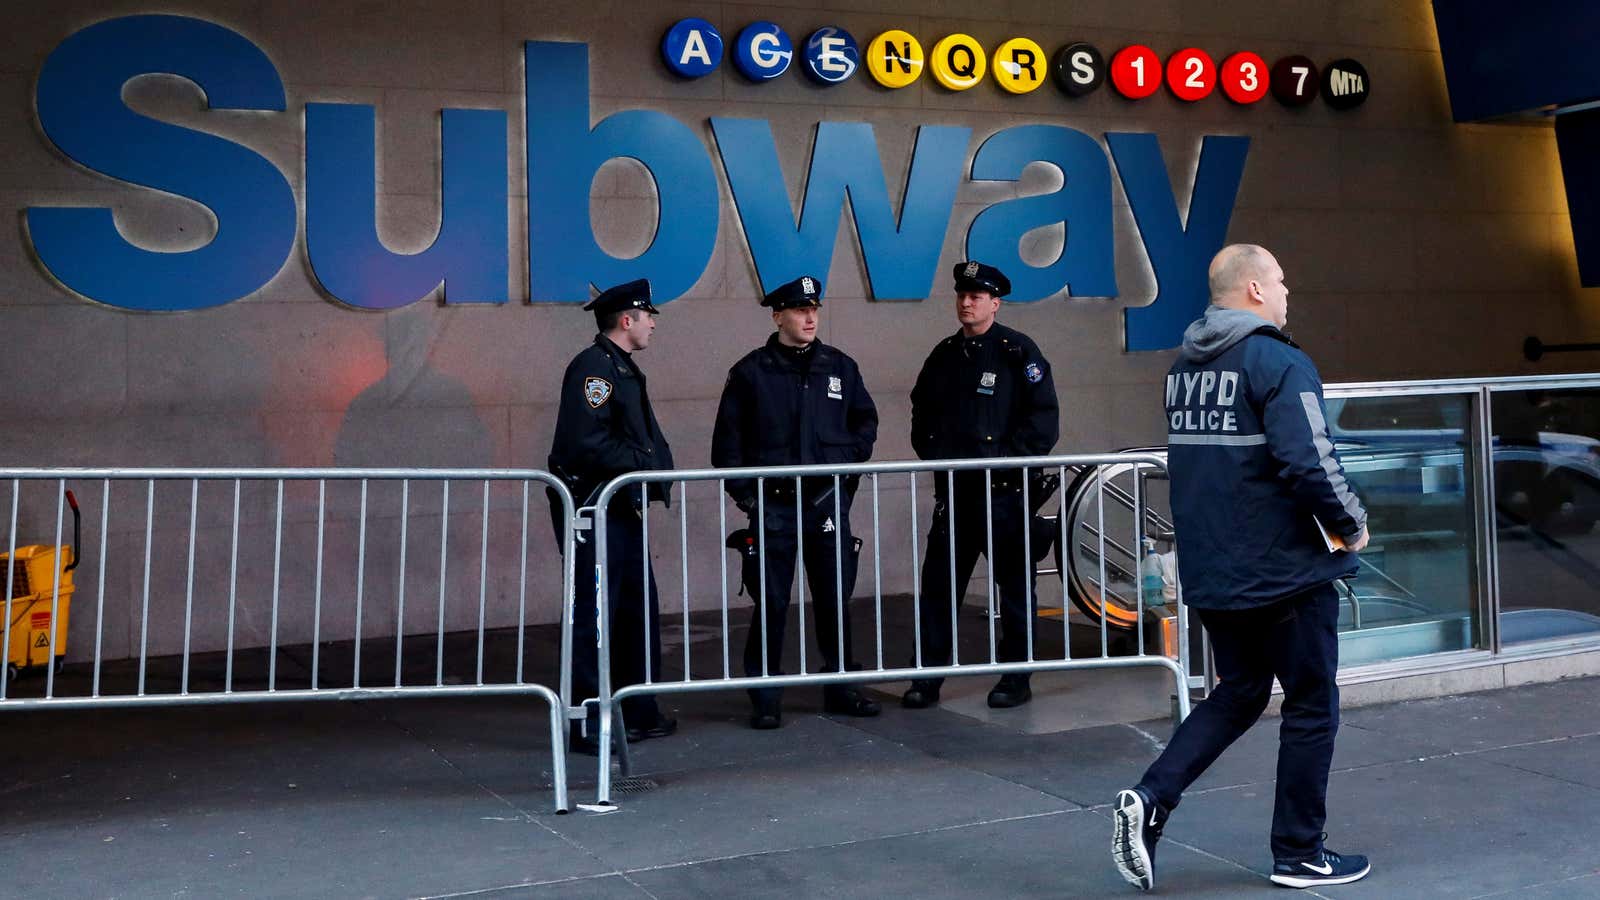 The Port Authority subway station entrance is guarded by police on Dec. 11.